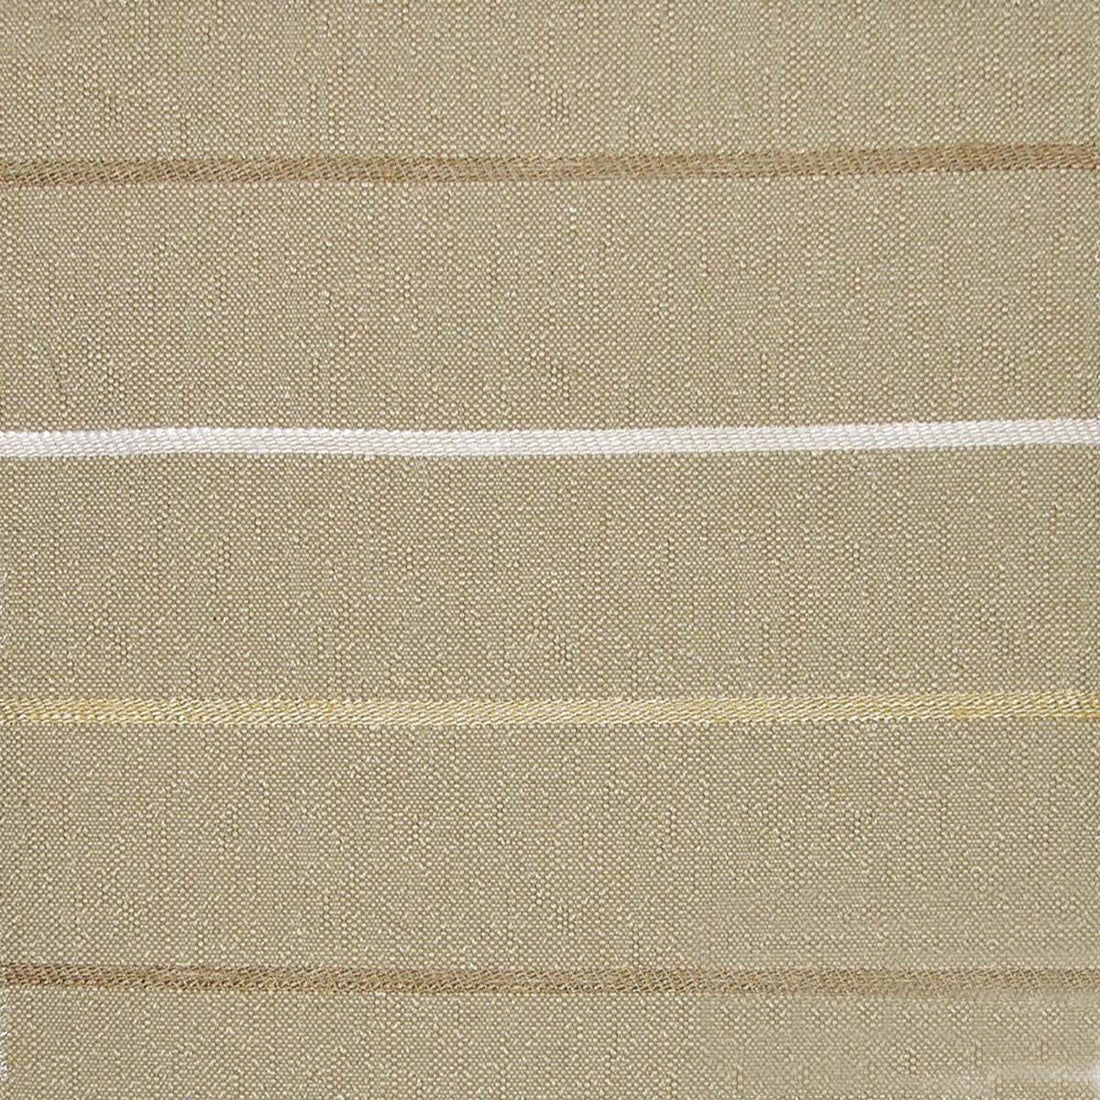 Calabria Stripe fabric in tan/white color - pattern number VN 06060966 - by Scalamandre in the Old World Weavers collection